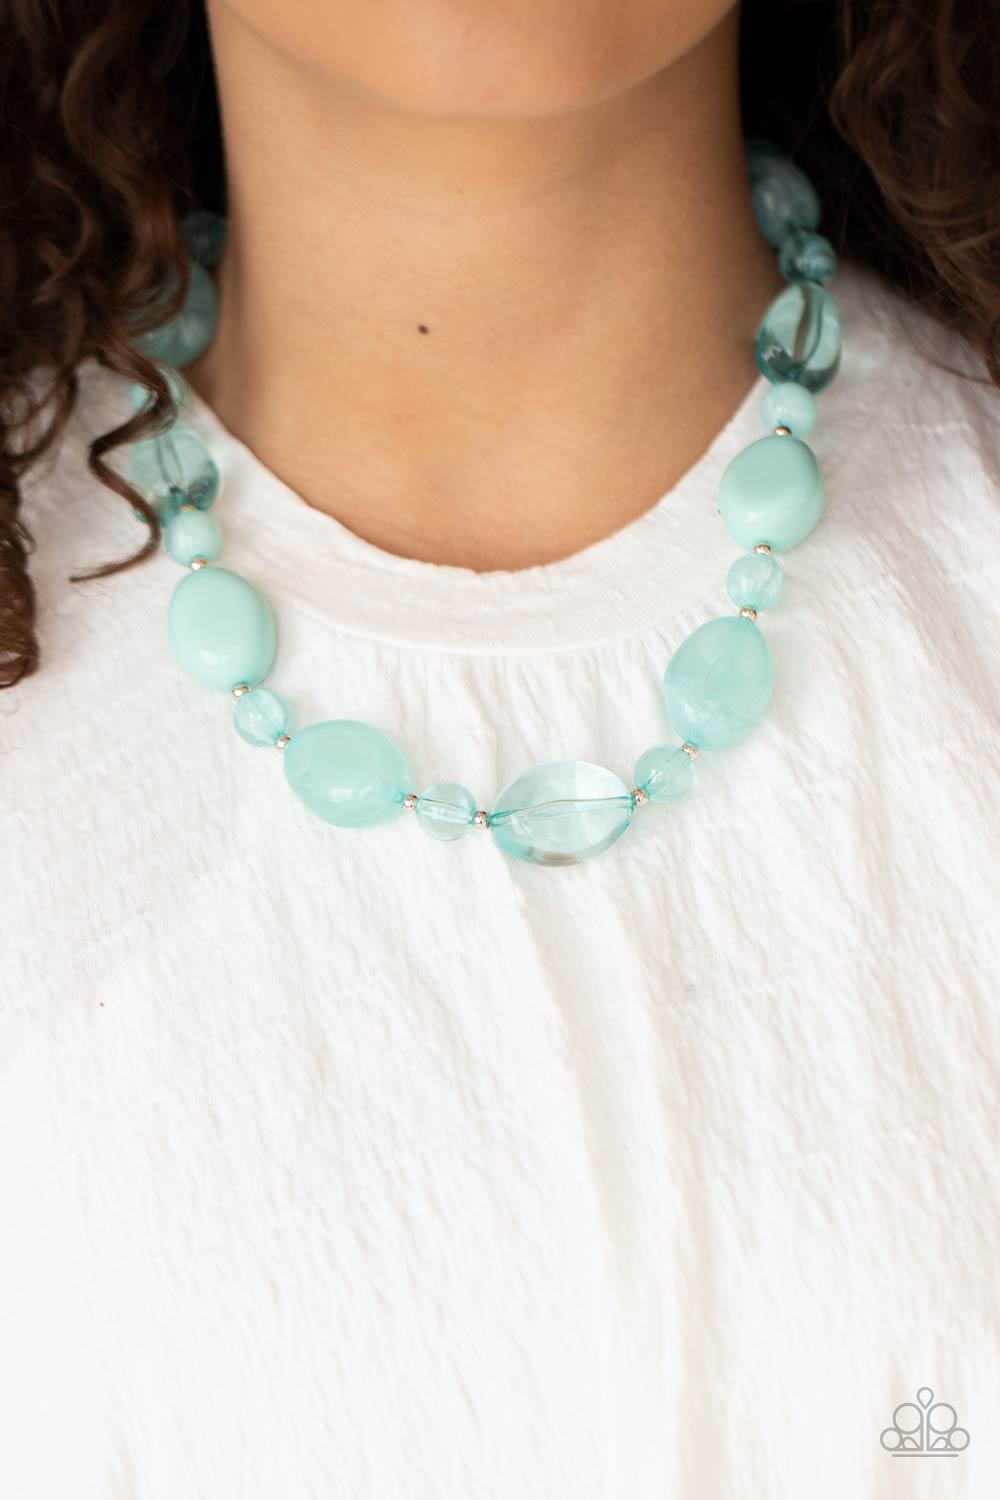 Staycation Stunner Blue Necklace - Paparazzi Accessories- model - CarasShop.com - $5 Jewelry by Cara Jewels